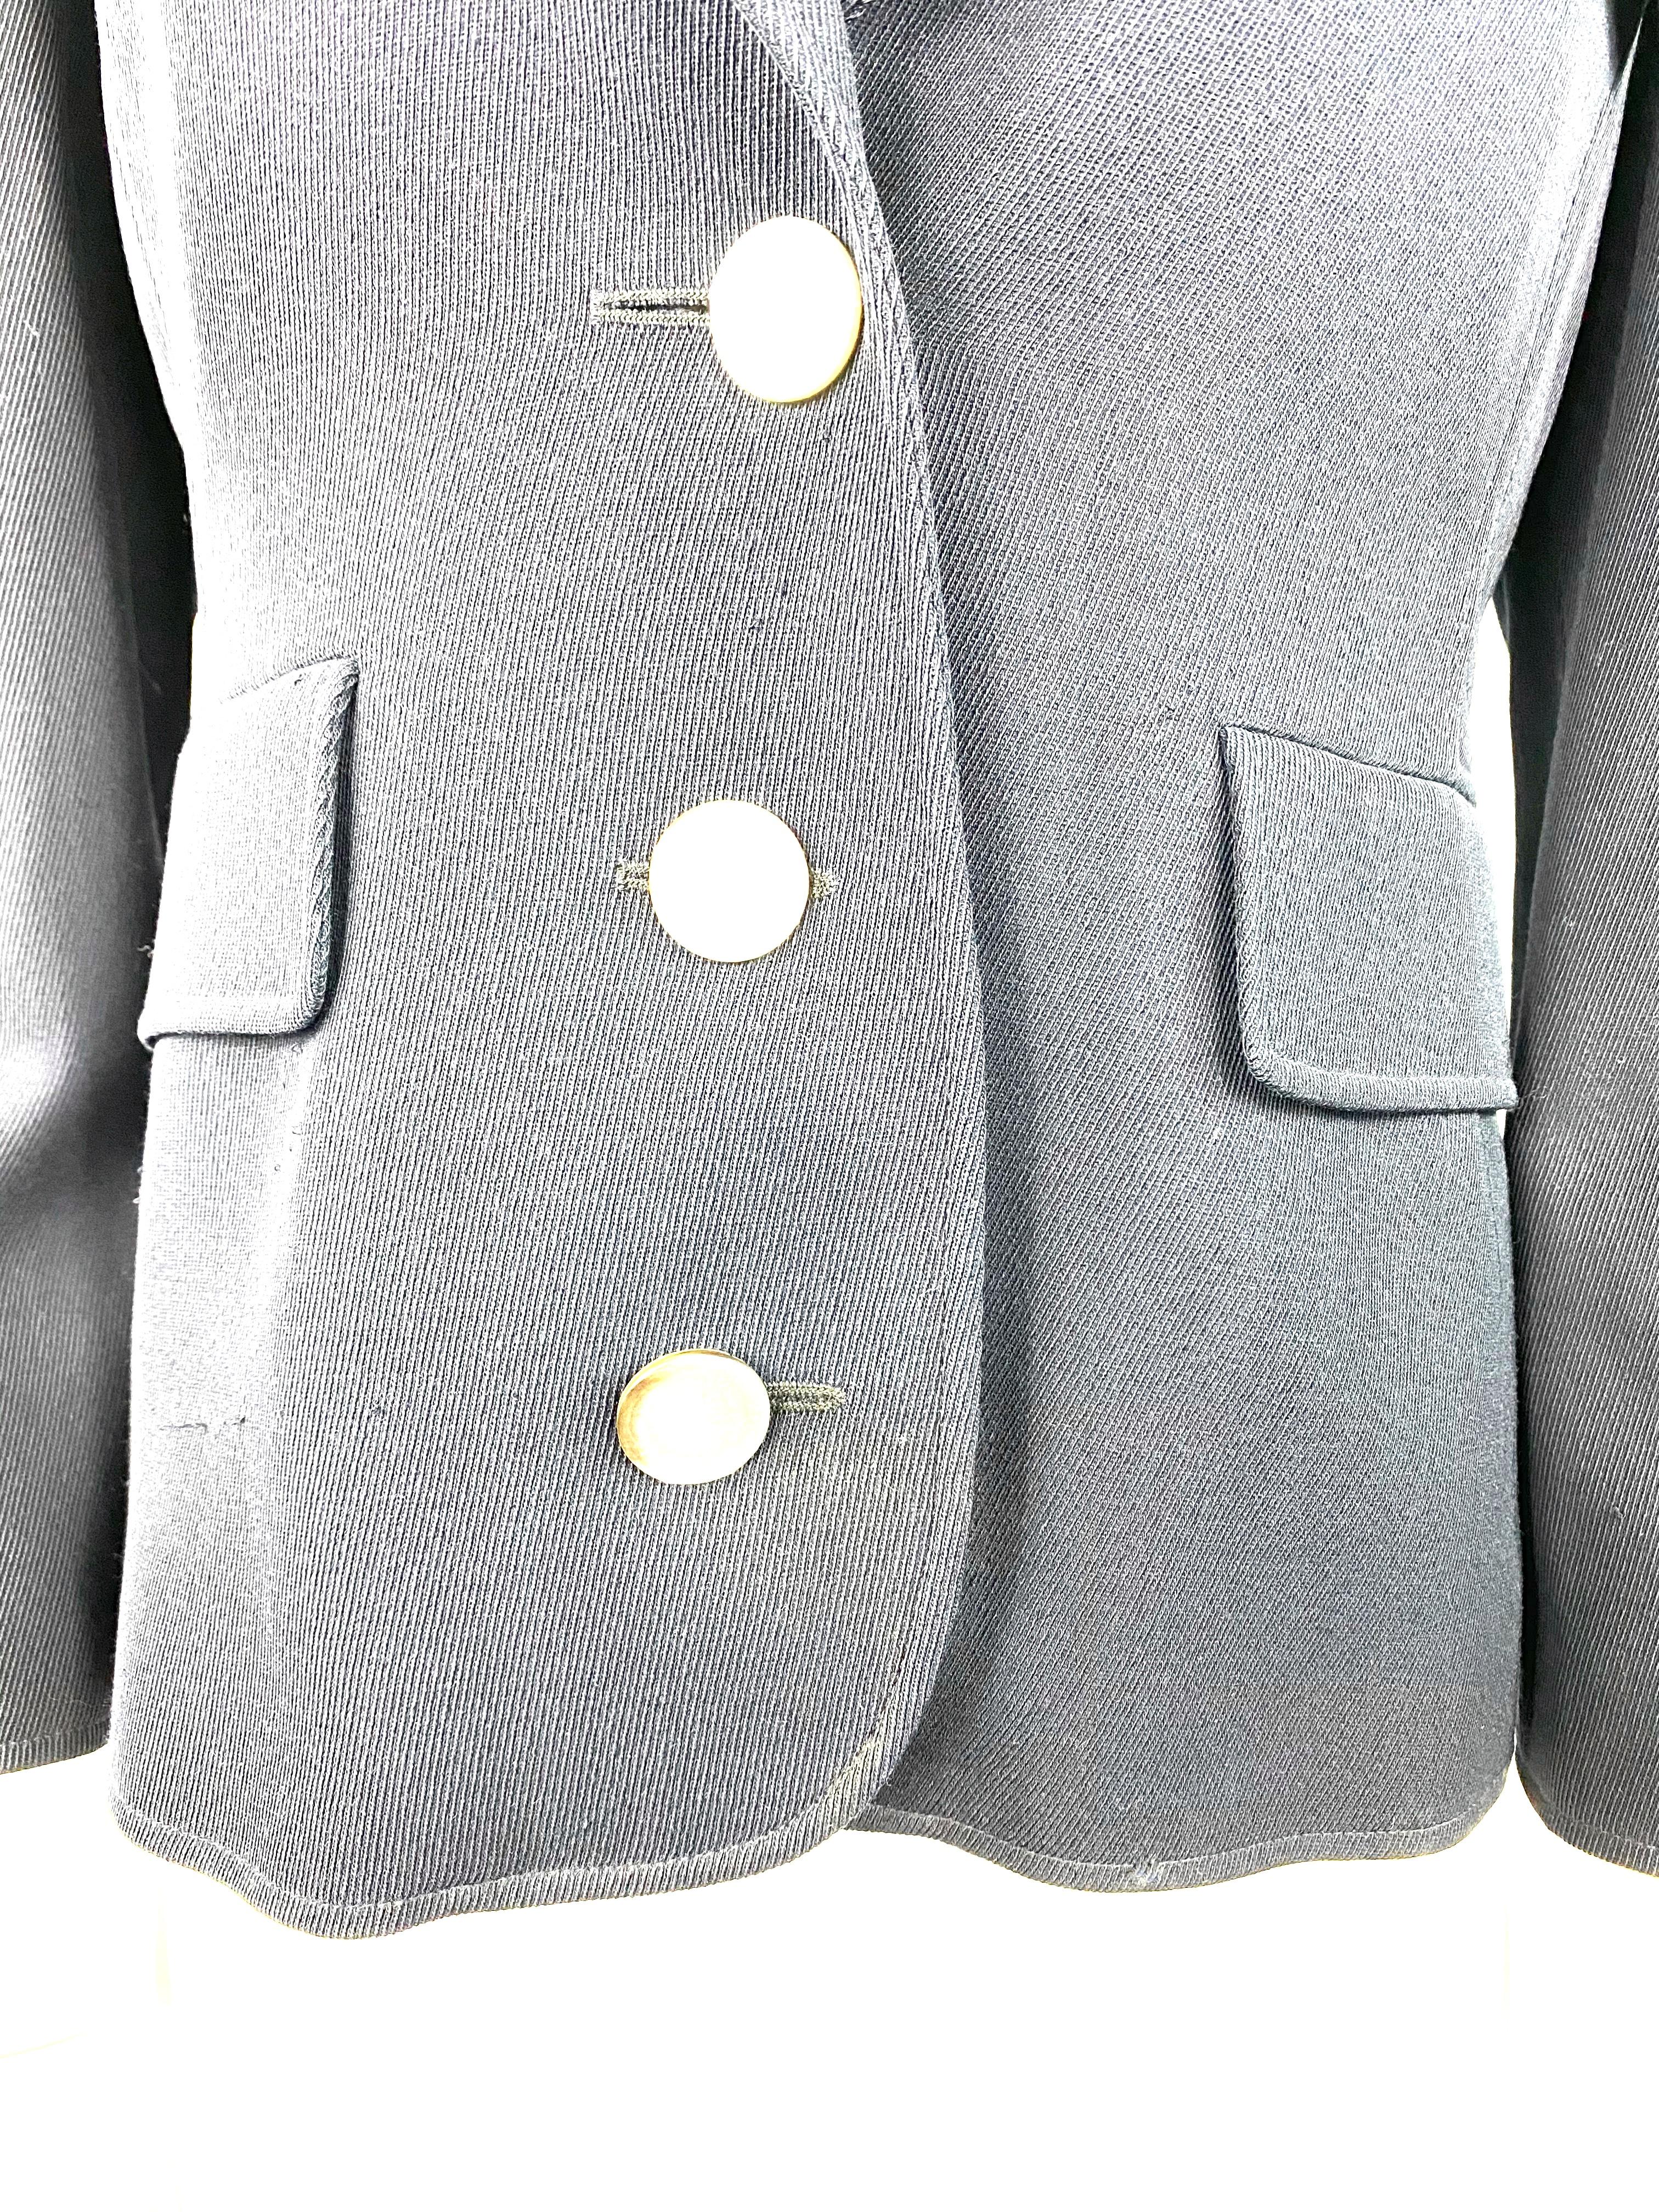 Product details:
Featuring collar, 3 front pockets, 3 large front buttons closure, 2 buttons detail on each sleeve, half rear belt detail with 2 buttons and ruffle detail on the back.
Made in Italy.
Size 6.